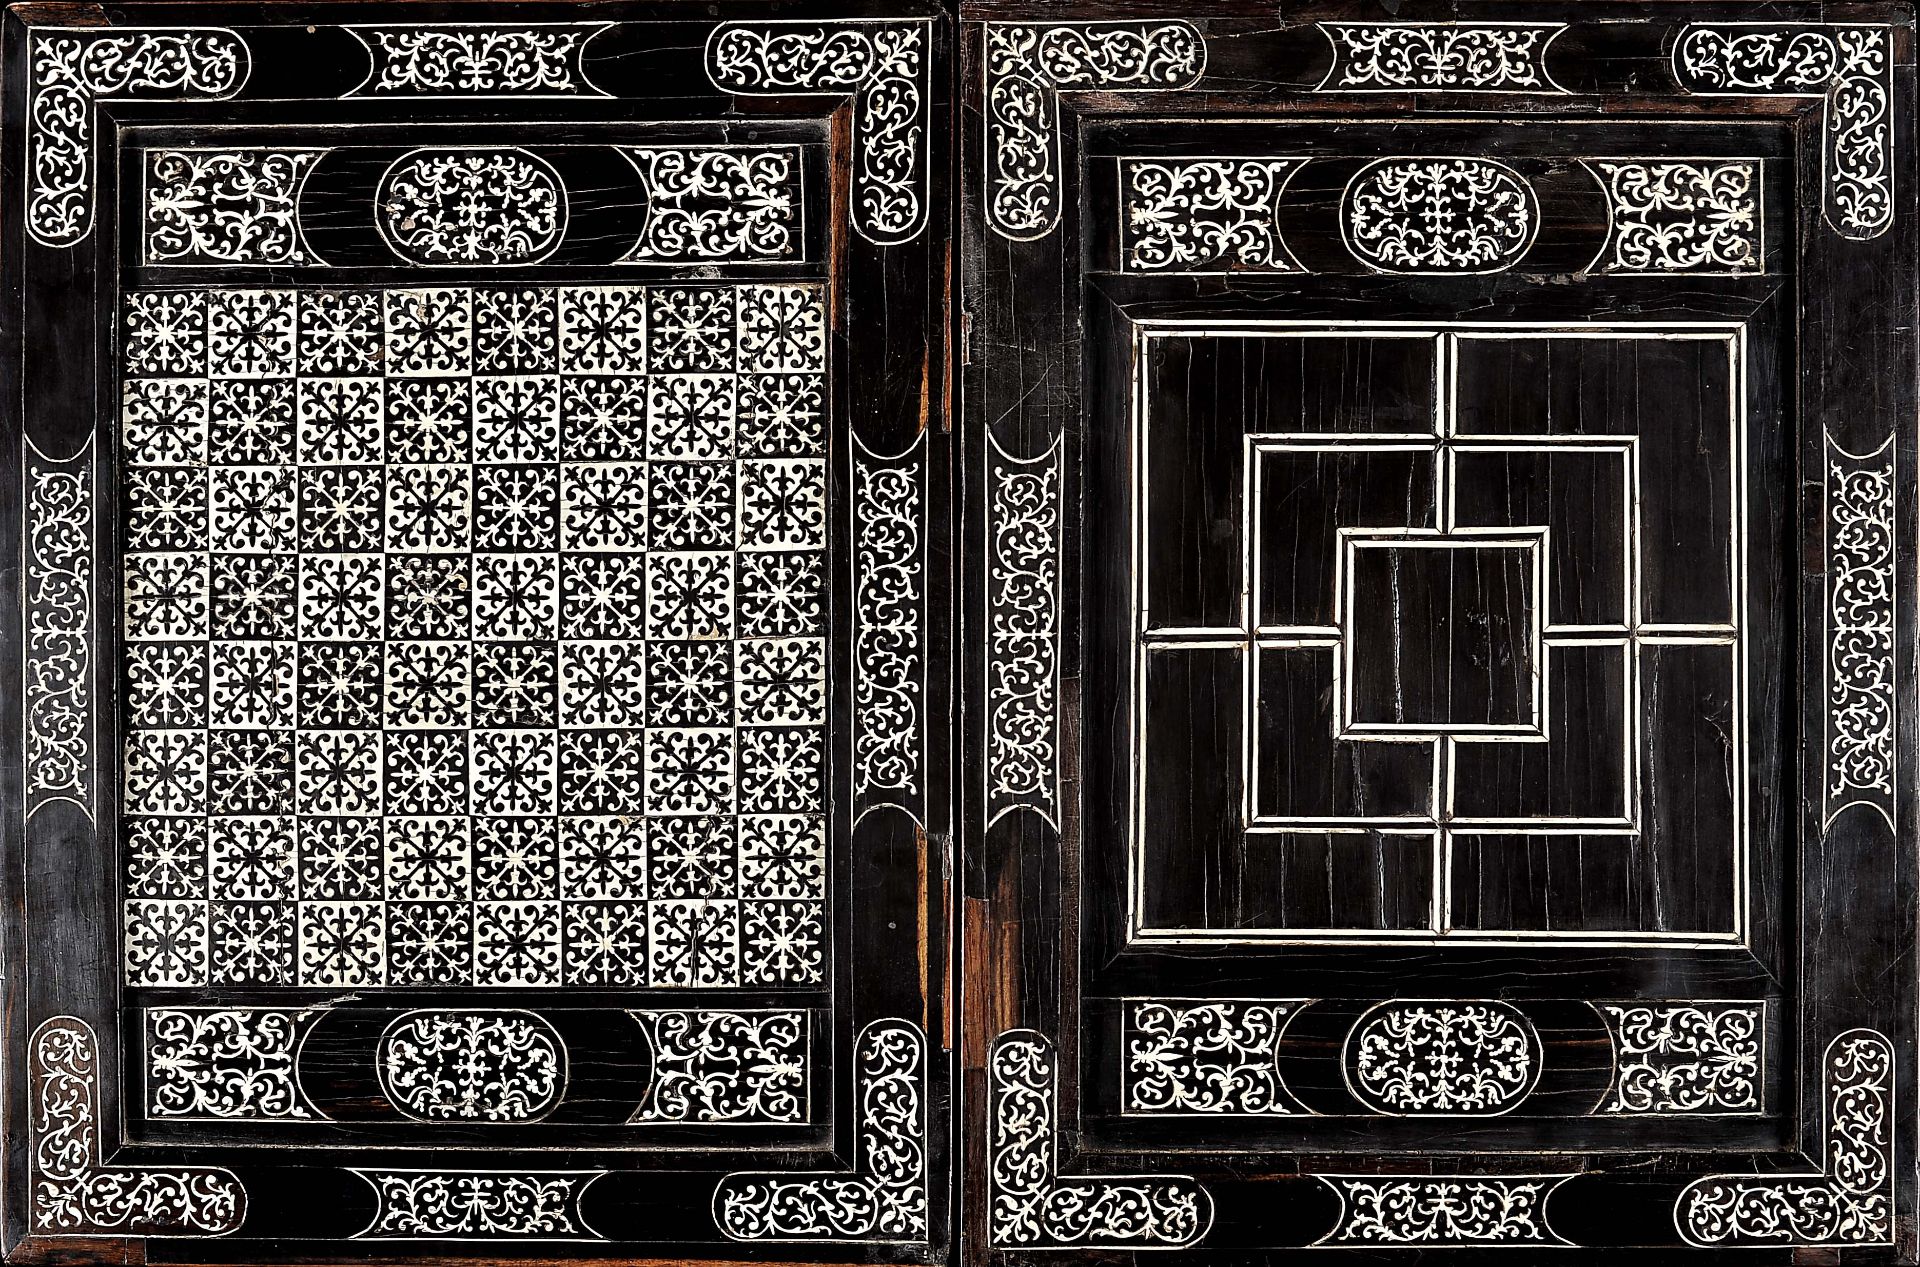 Chess, Backgammon and Nine Men's Morris Board (Ginner Game) articulated closing in the form of a box - Image 4 of 8